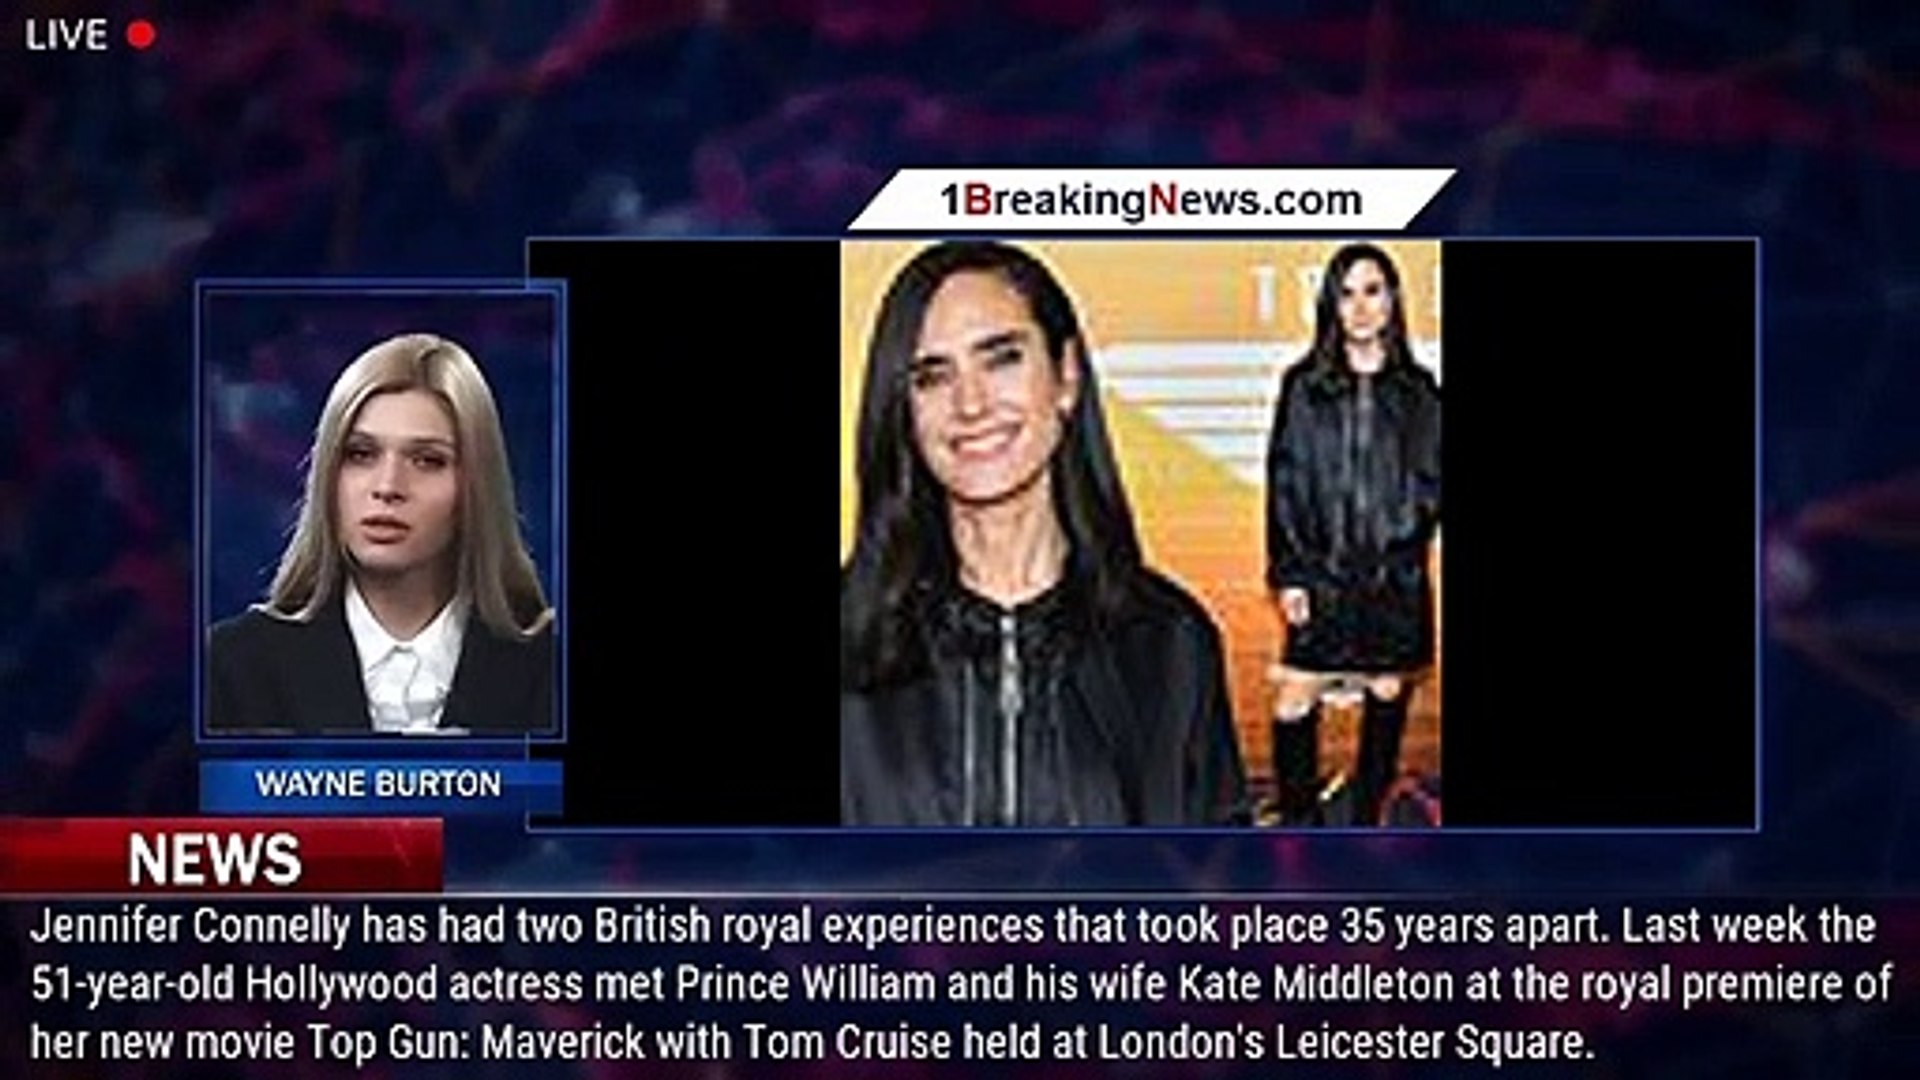 Jennifer Connelly, 51, reveals Prince William was not the first British  royal she has met